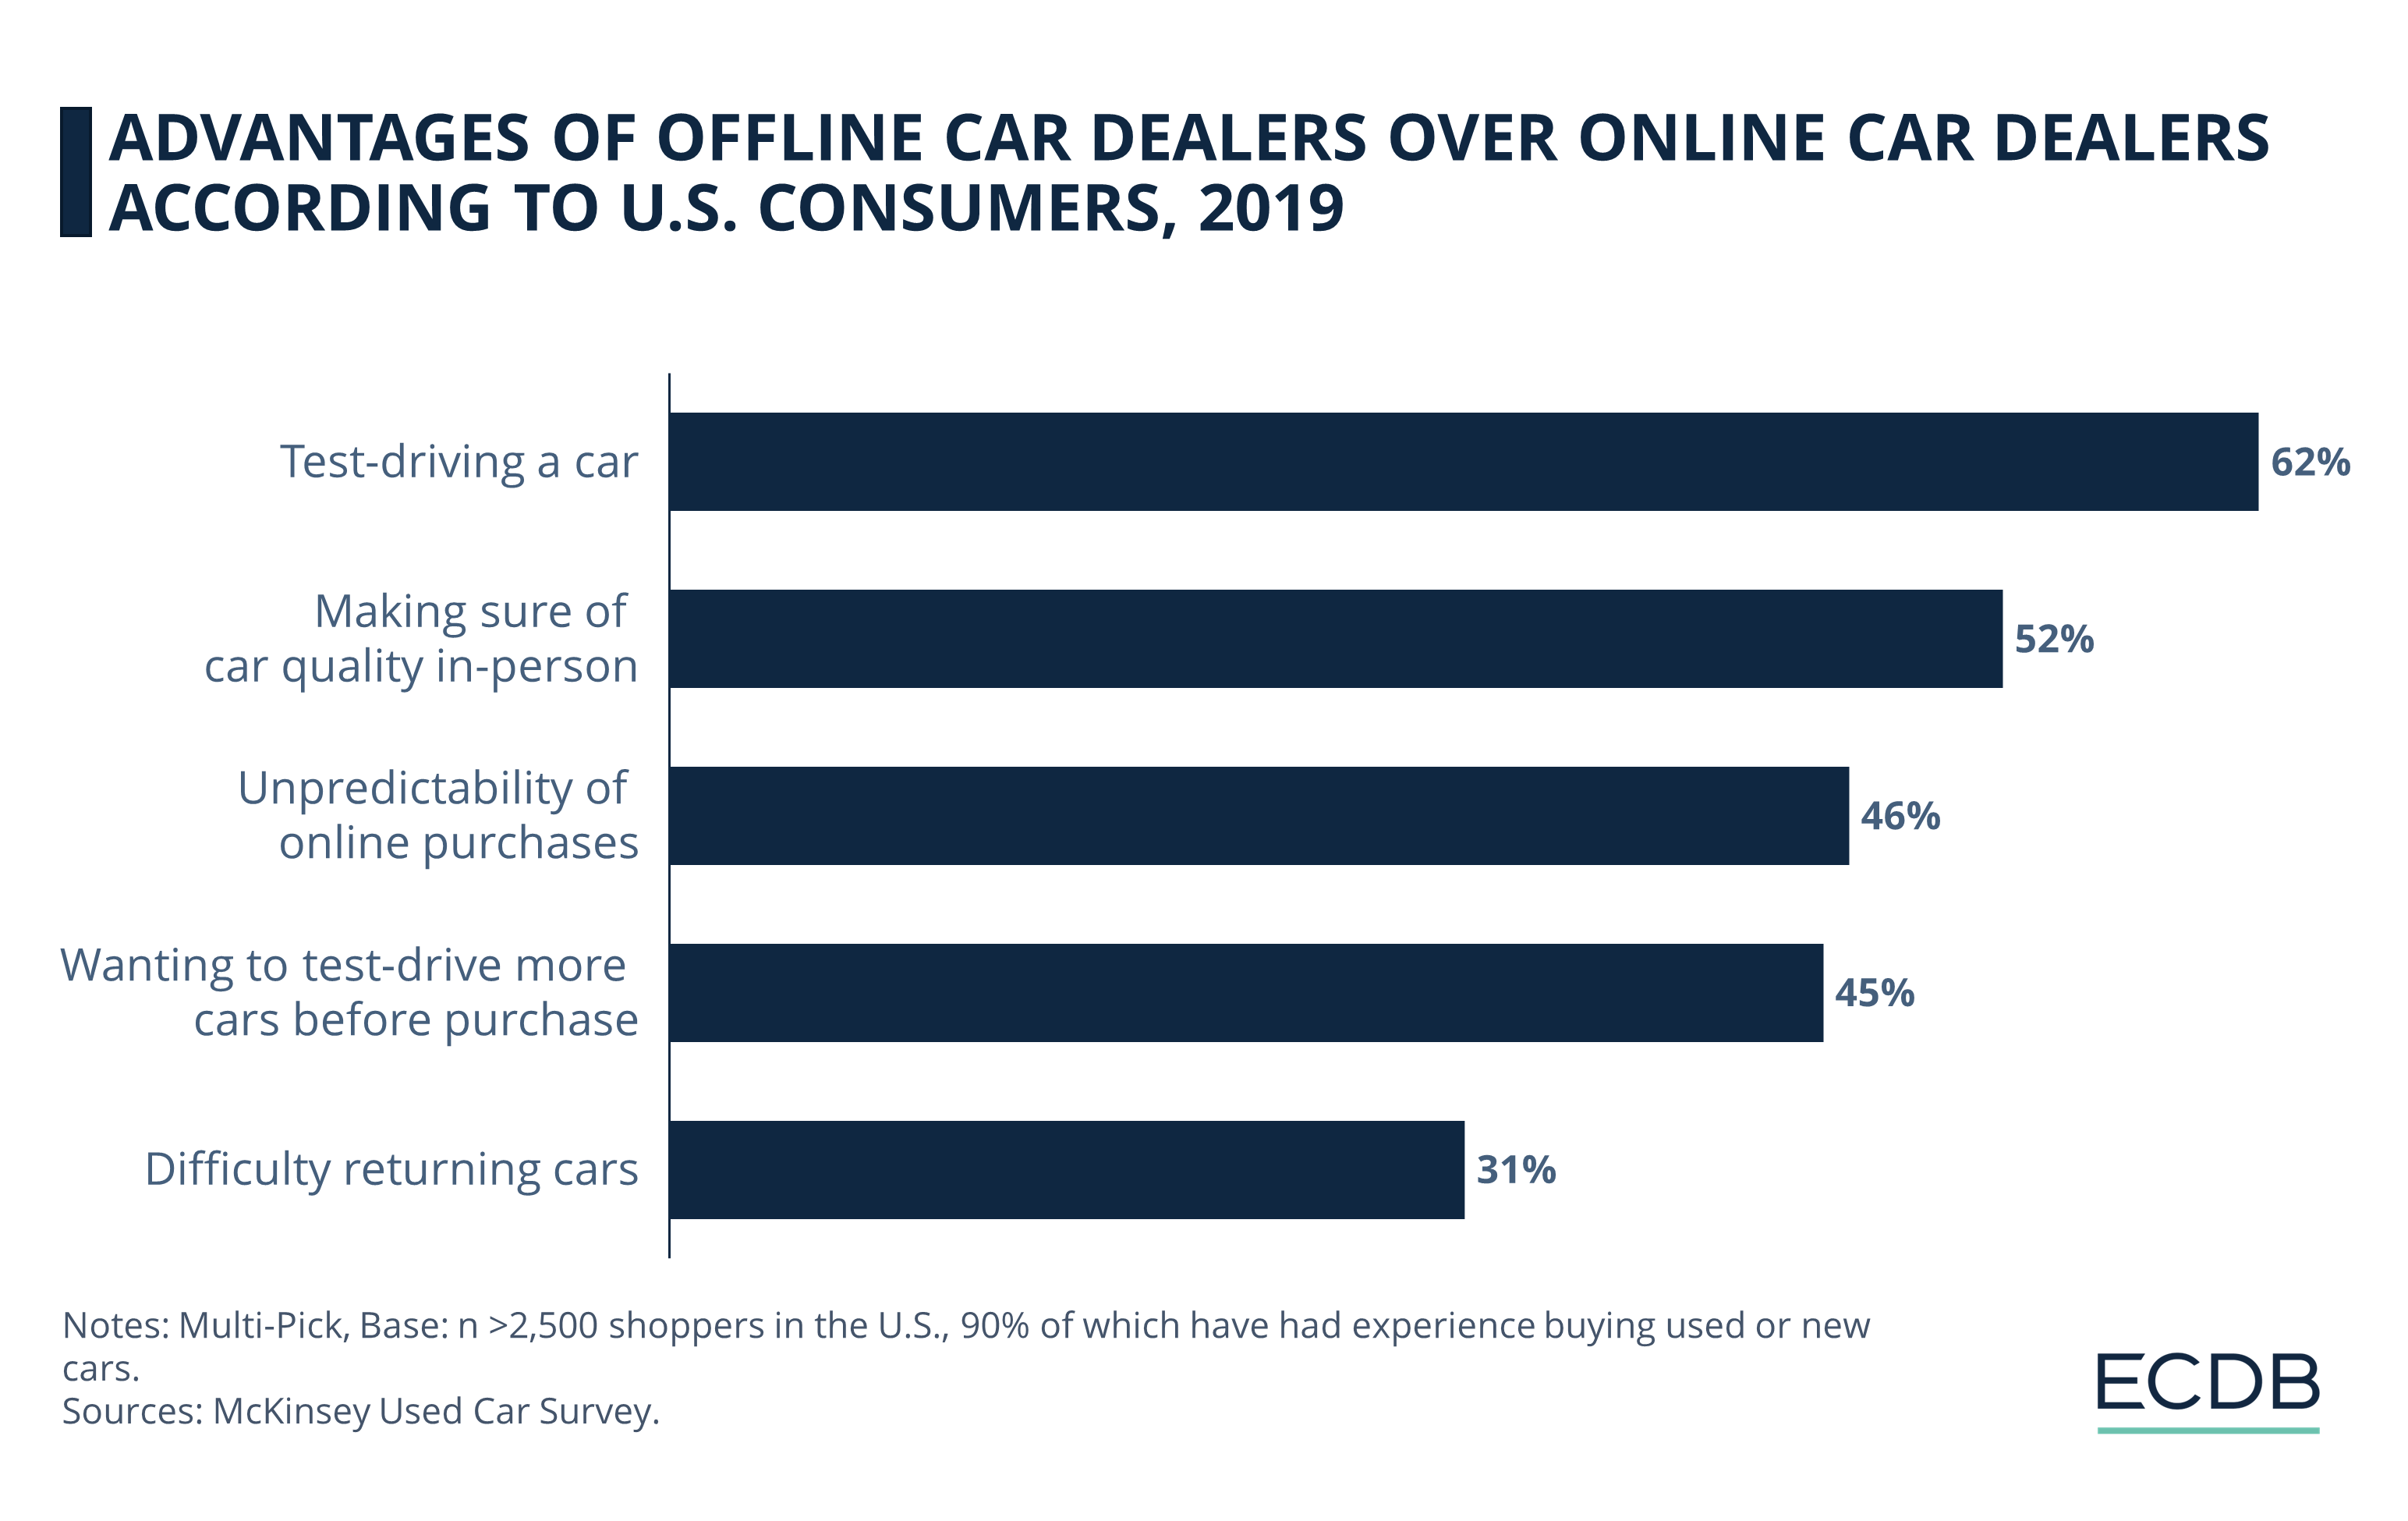 Advantages of Offline Car Dealers Over Online Car Dealers According to U.S. Consumers, 2019